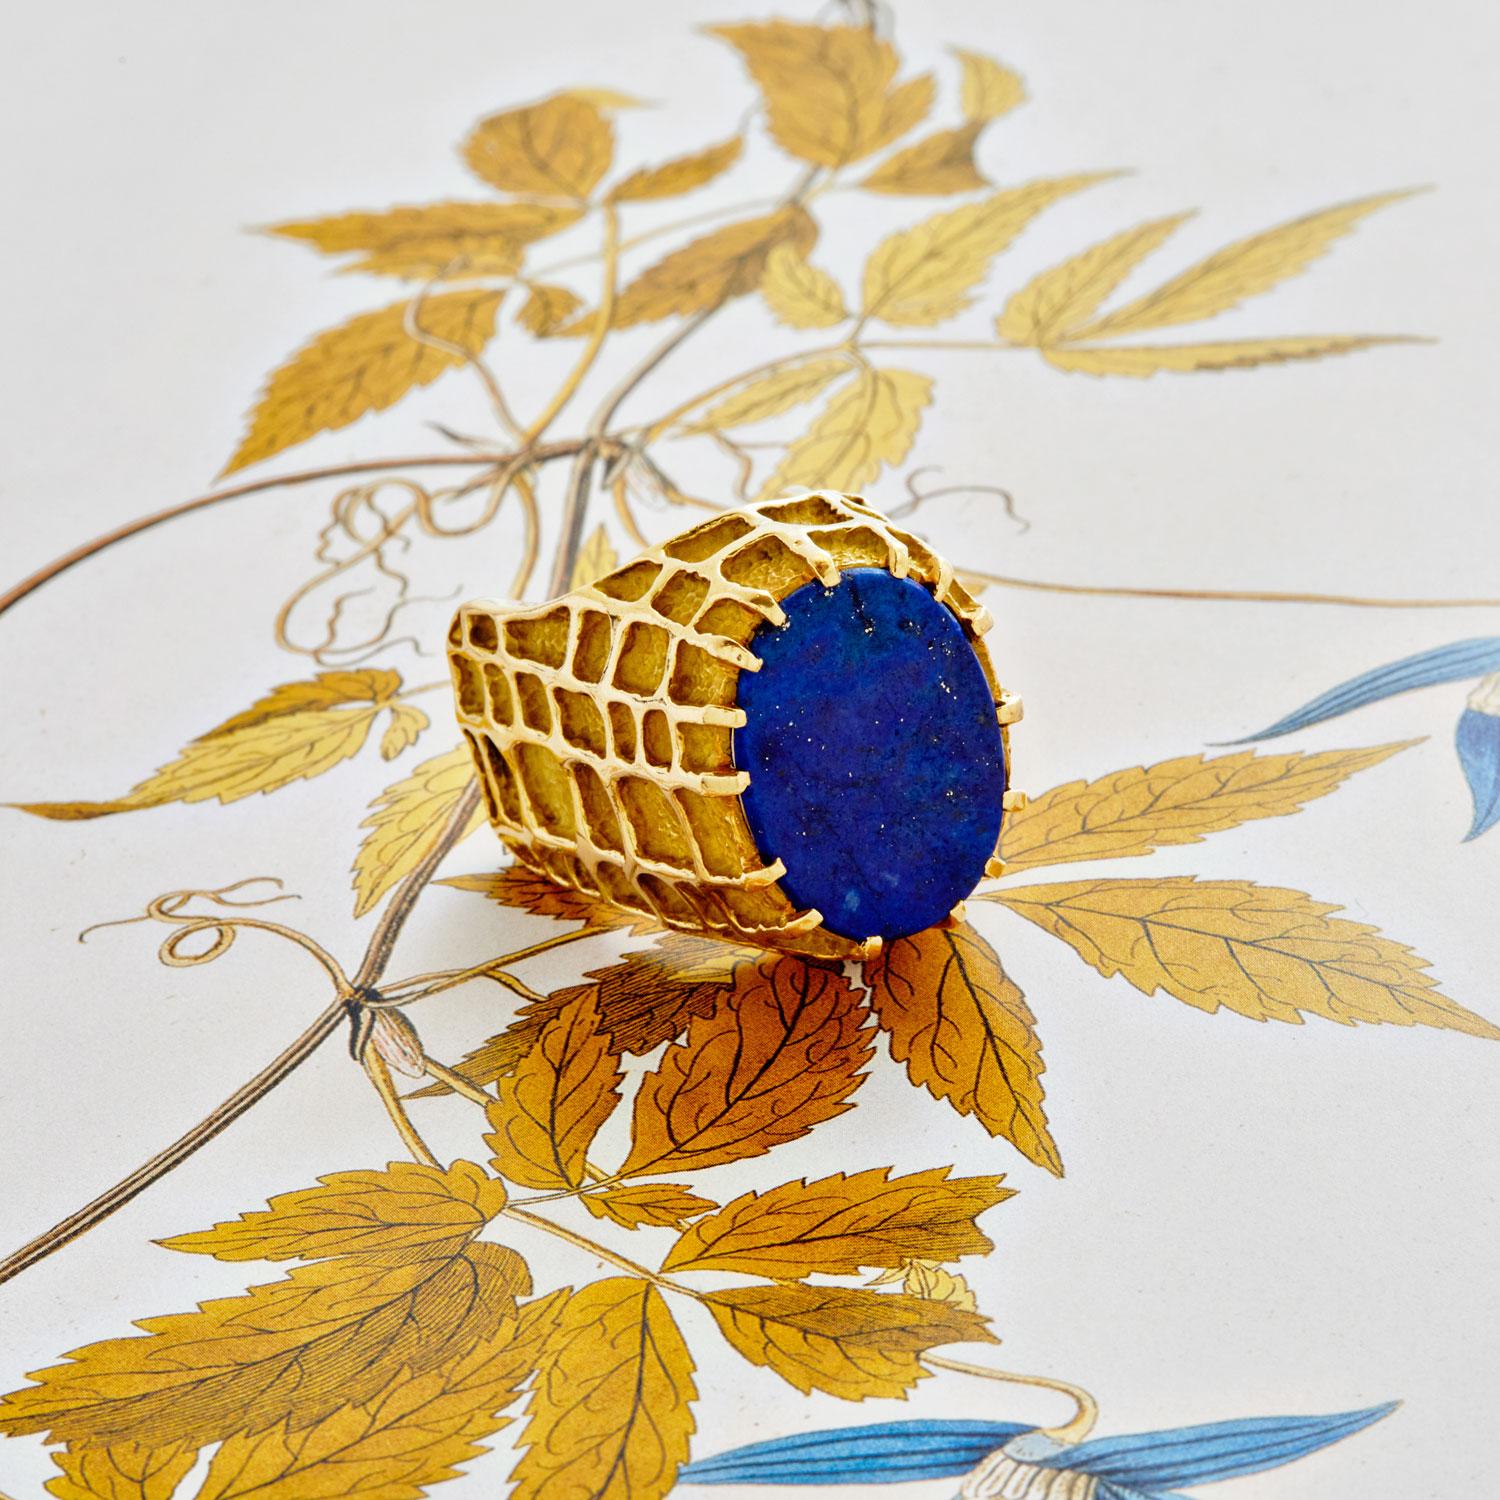 Master jeweler Henry Dunay is known for his intricately worked gold surfaces. This modern take on a cocktail ring features vibrant lapis lazuli set in a textured gold honeycomb design mount.

.84